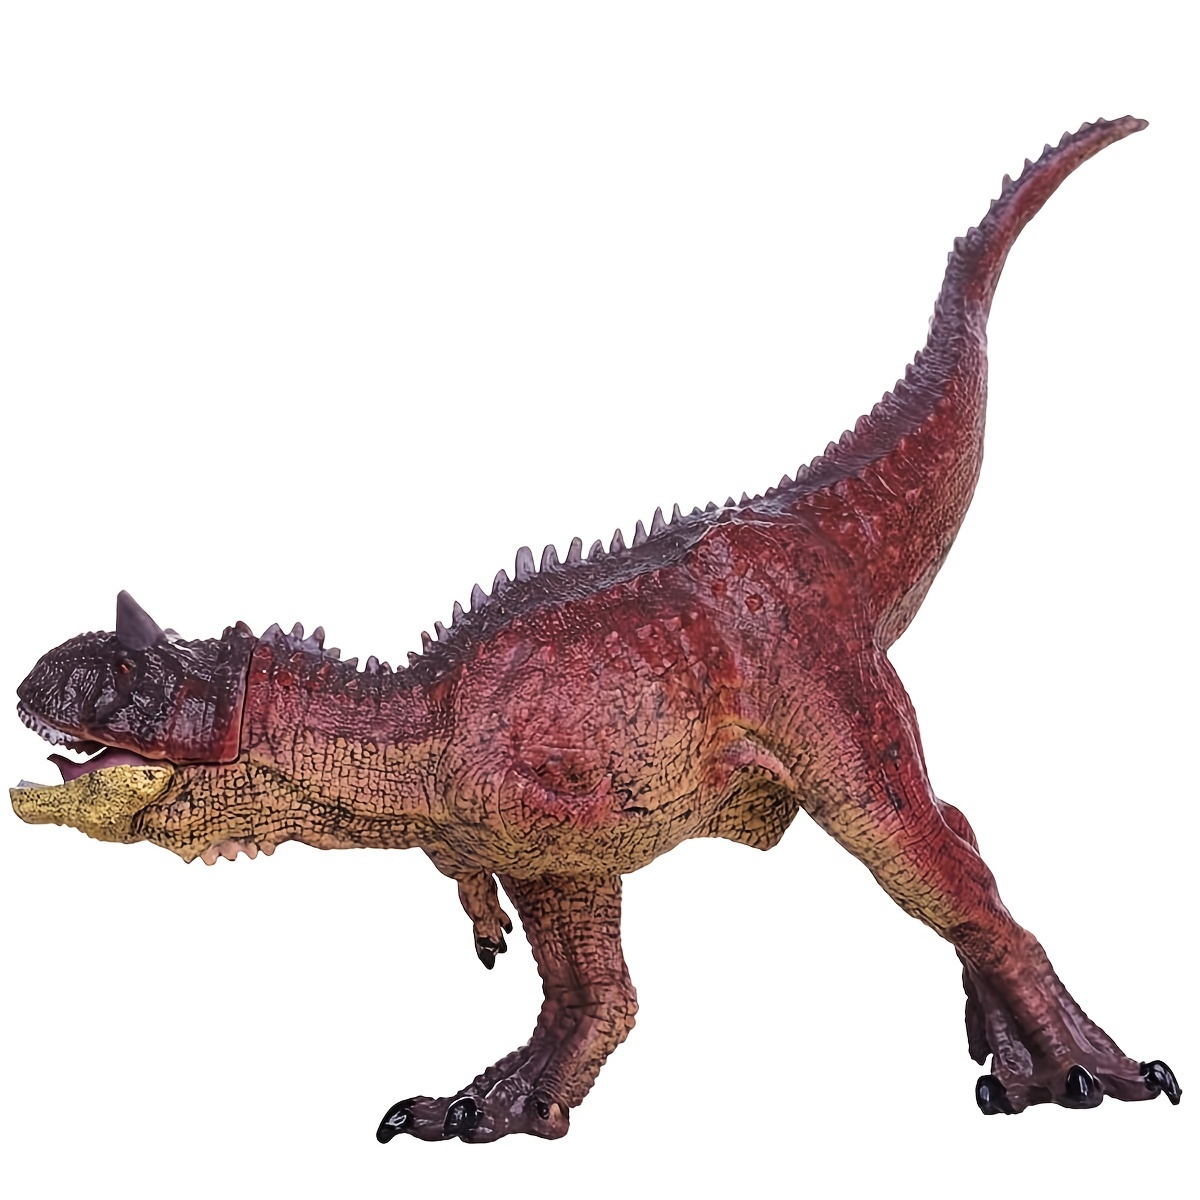 Schleich Dinosaurs Tyrannosaurus Rex - King of the Dinosaurs Tyrannosaurus  Rex Toy with TRex Chomping Action Jaw, Dino World Action Figure for Boys